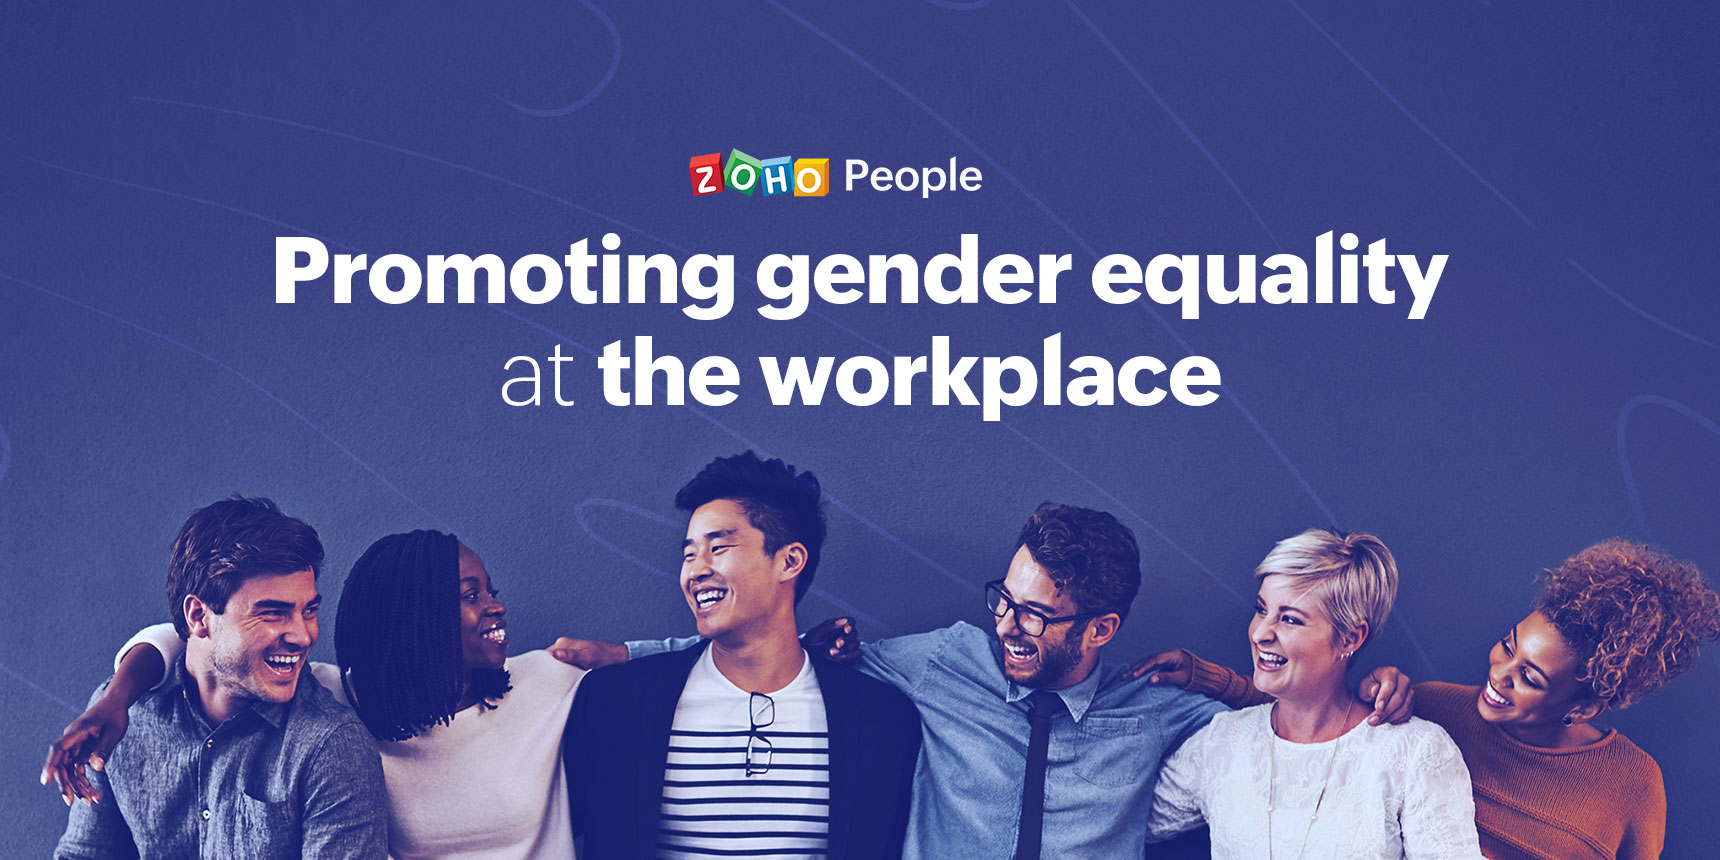 gender equality in the workplace presentation